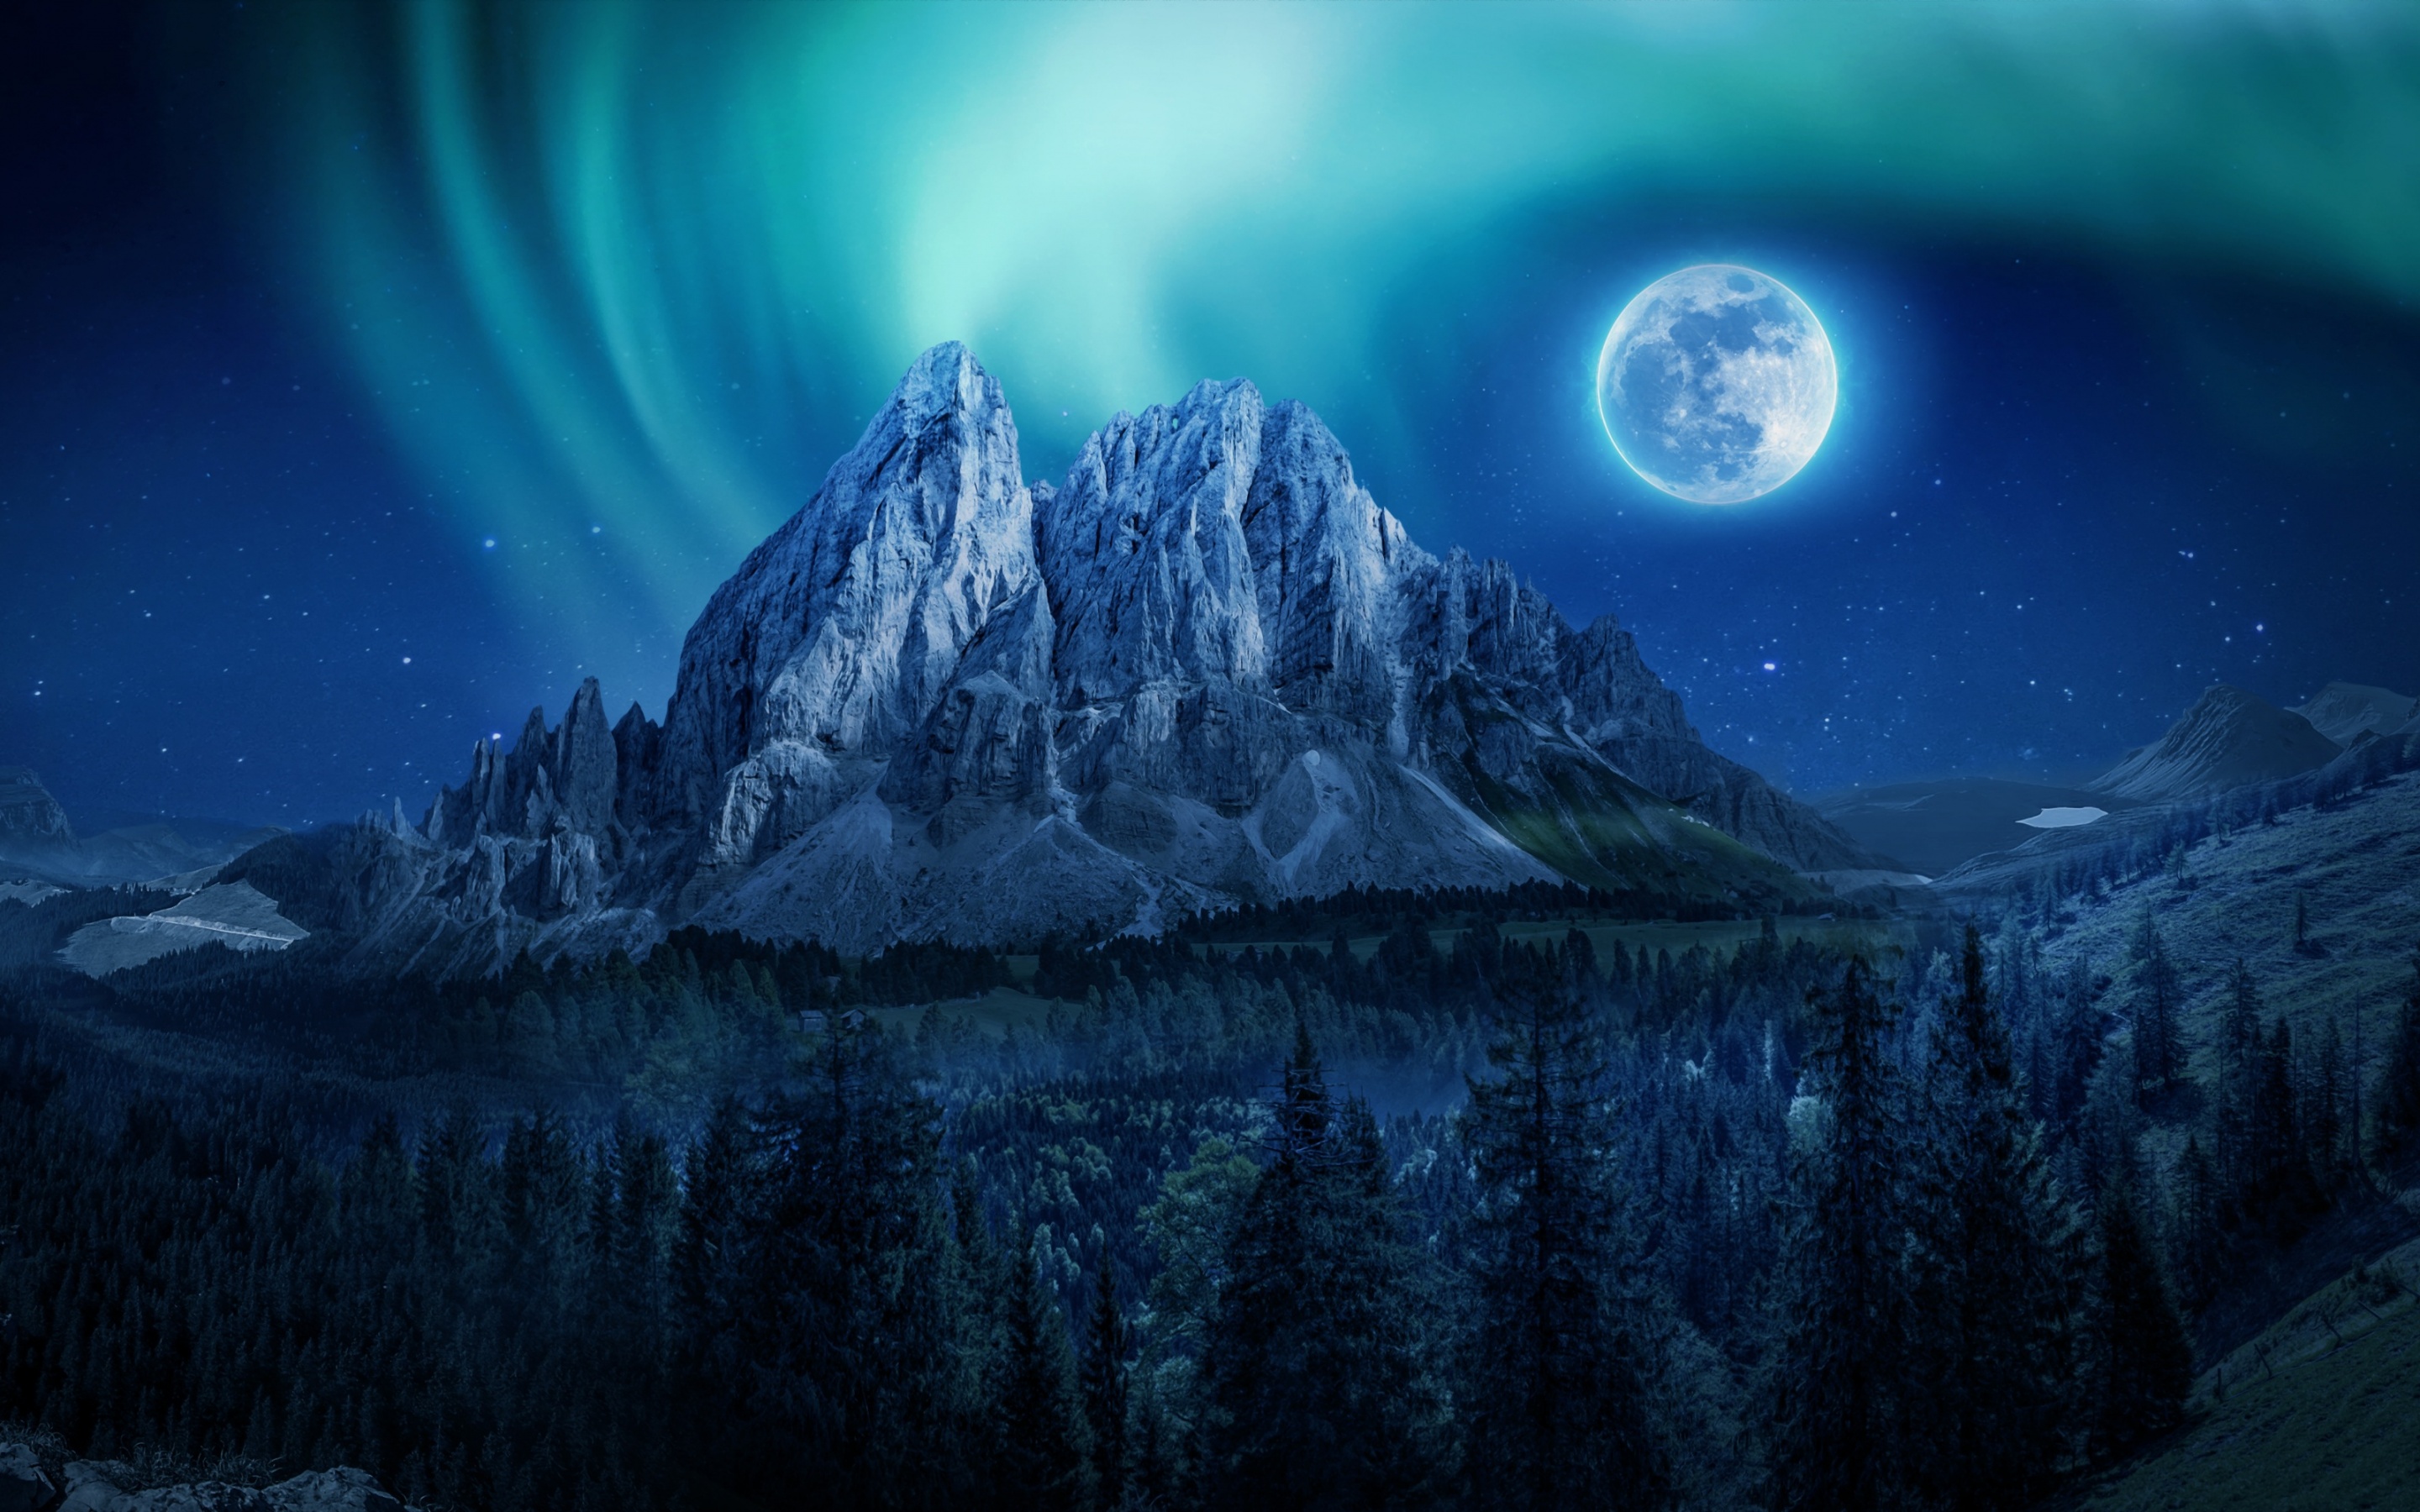 https://4kwallpapers.com/images/wallpapers/moon-aurora-borealis-mountains-winter-forest-night-2880x1800-408.jpg